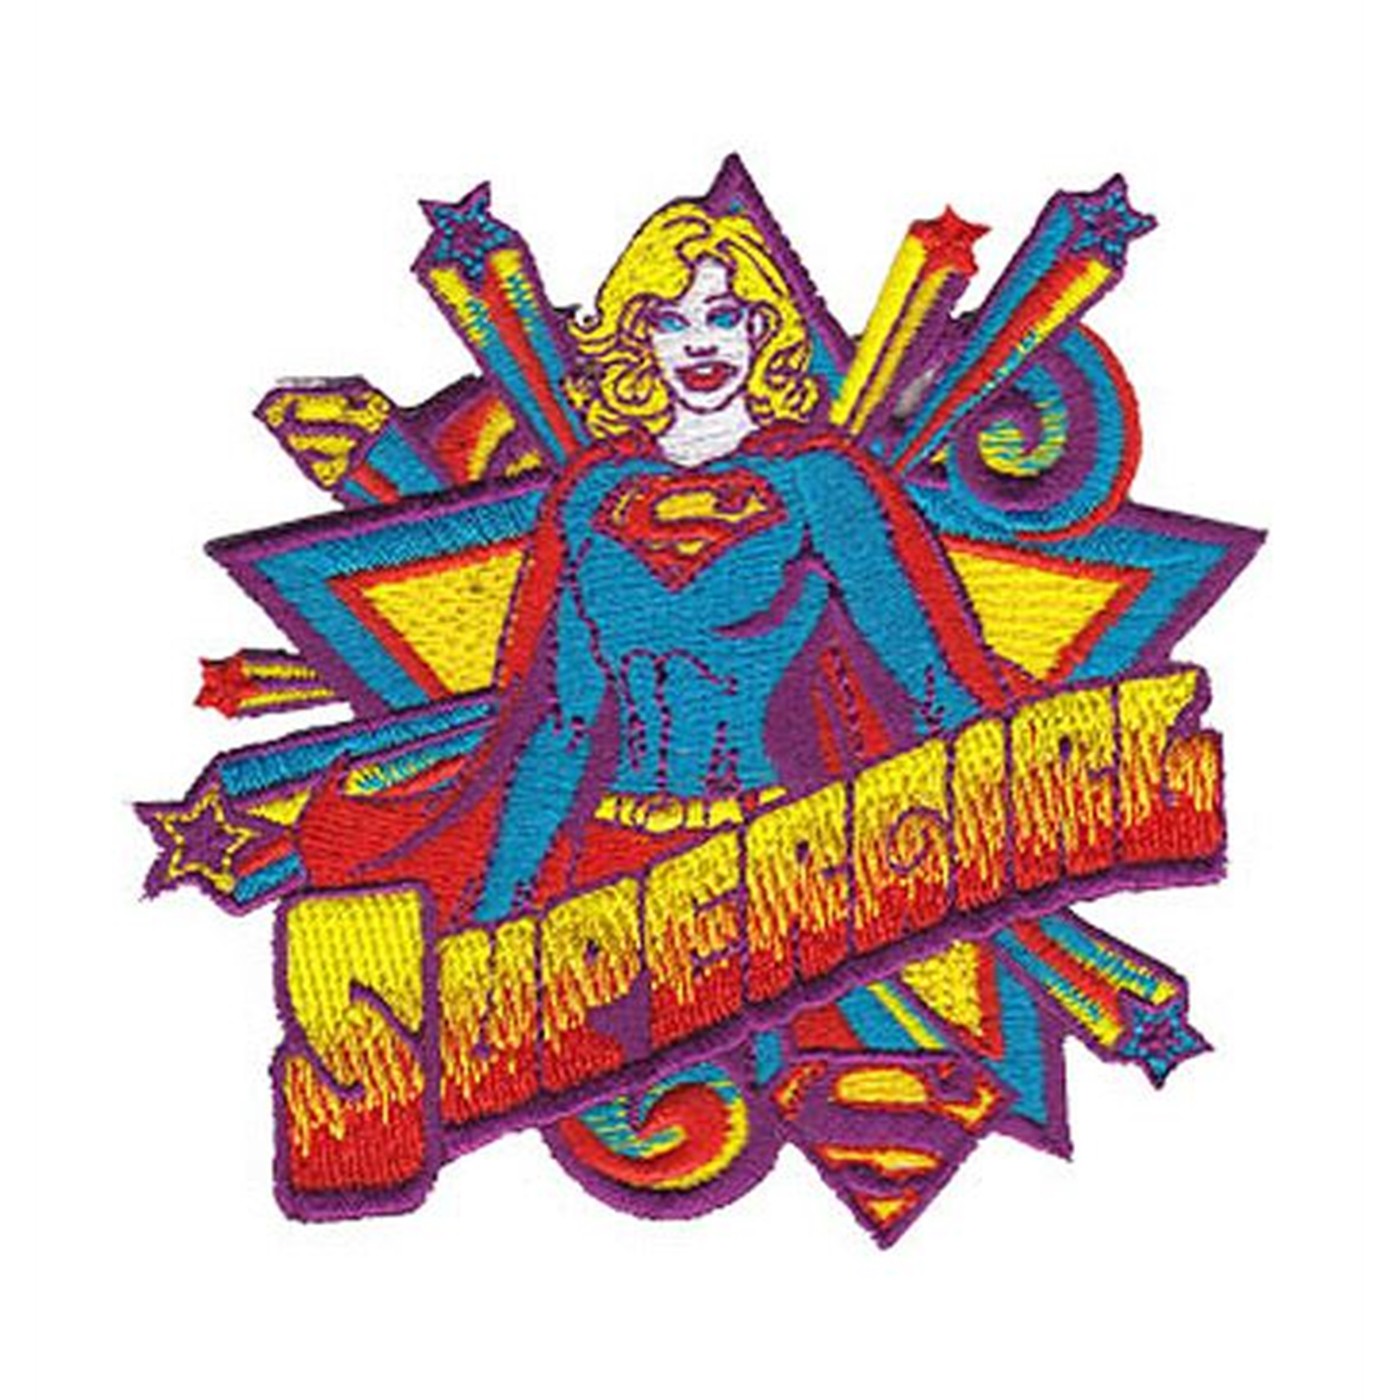 Supergirl Hippie Flames Patch